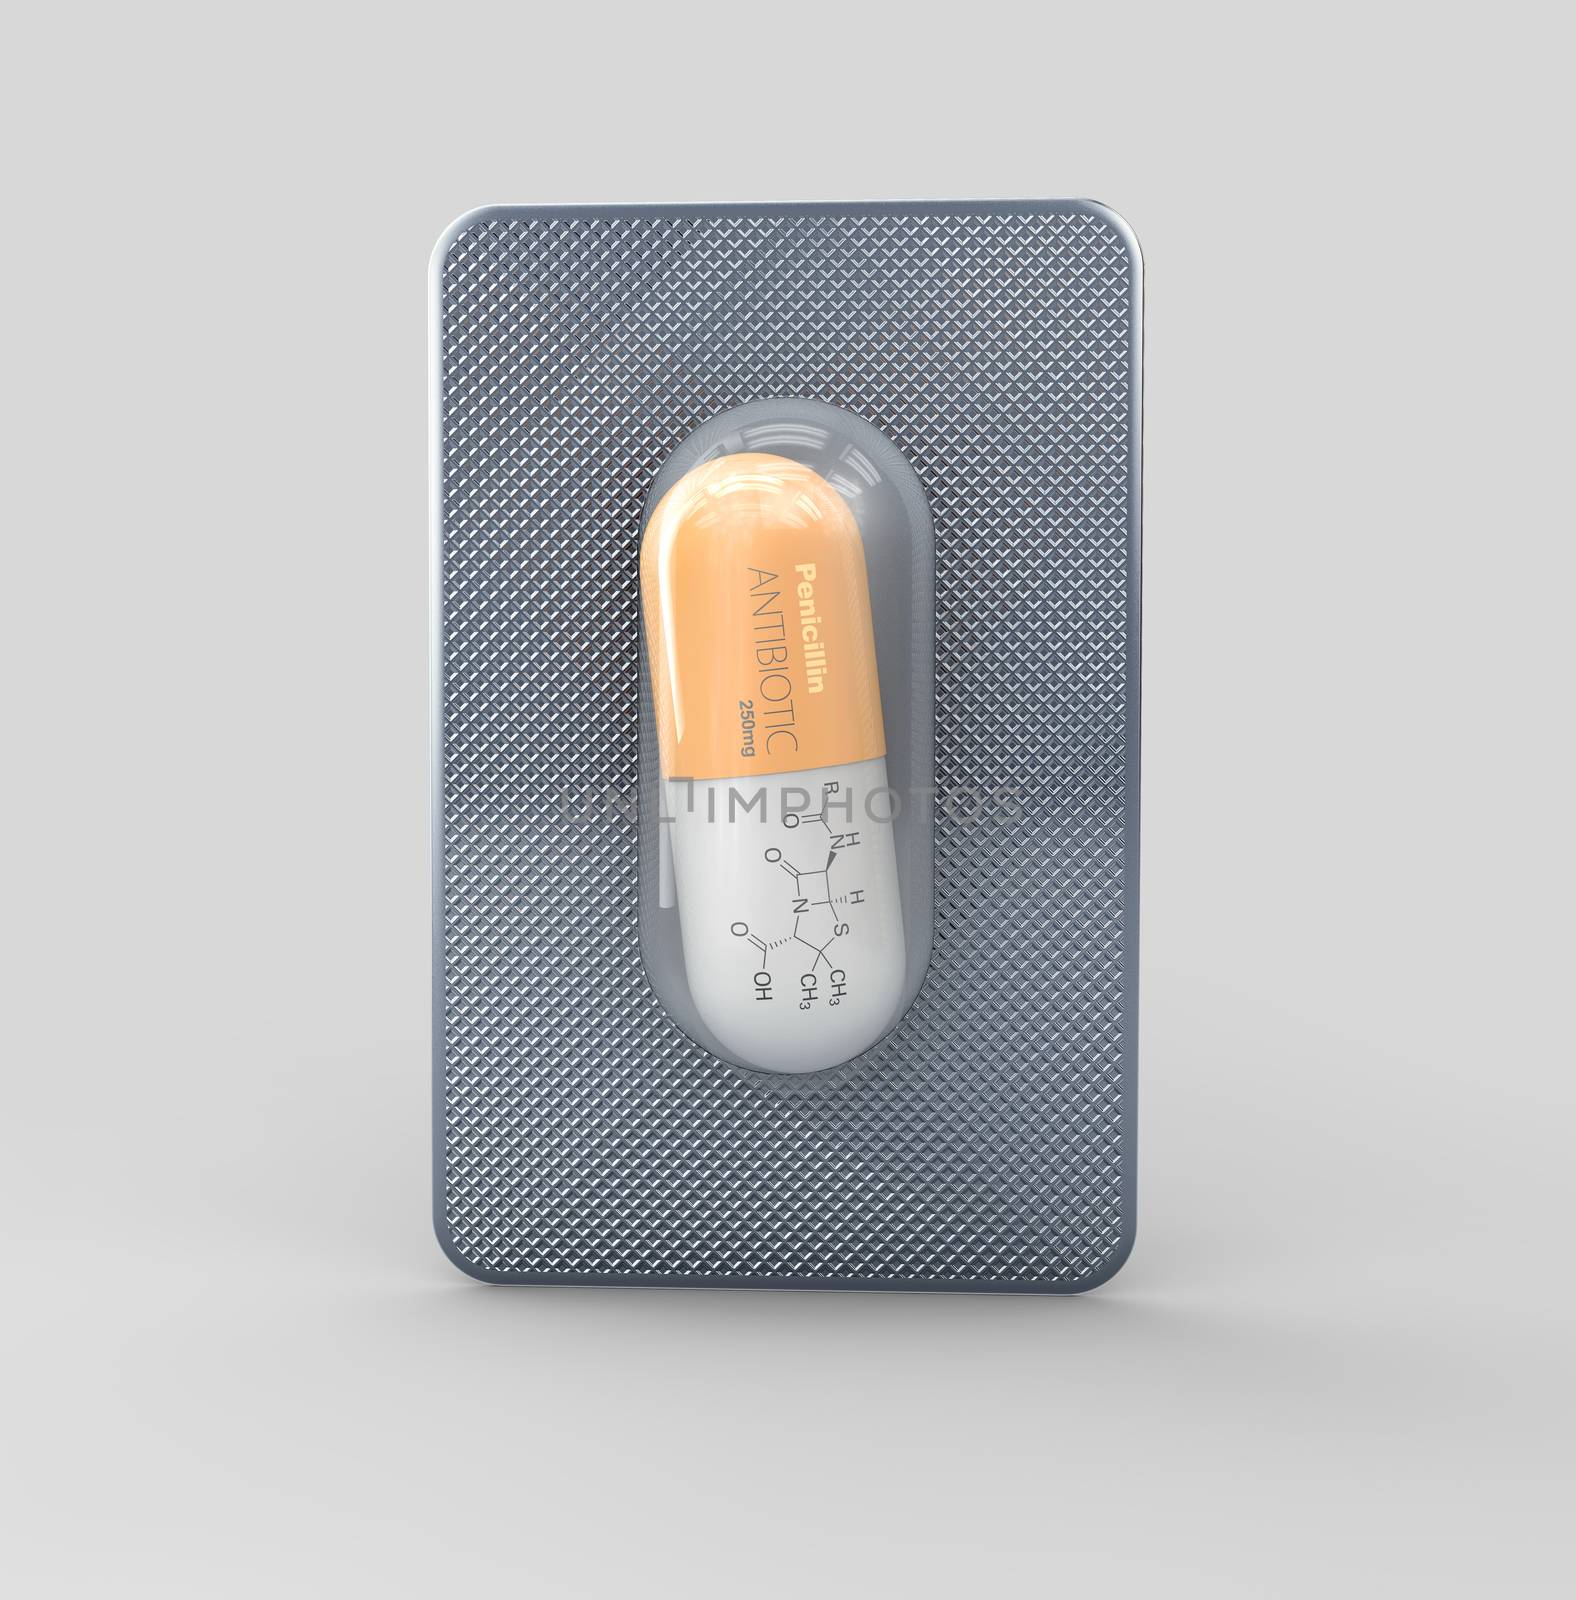 Pill of Penicillin, isolated white 3d Illustration, clipping path included by tussik